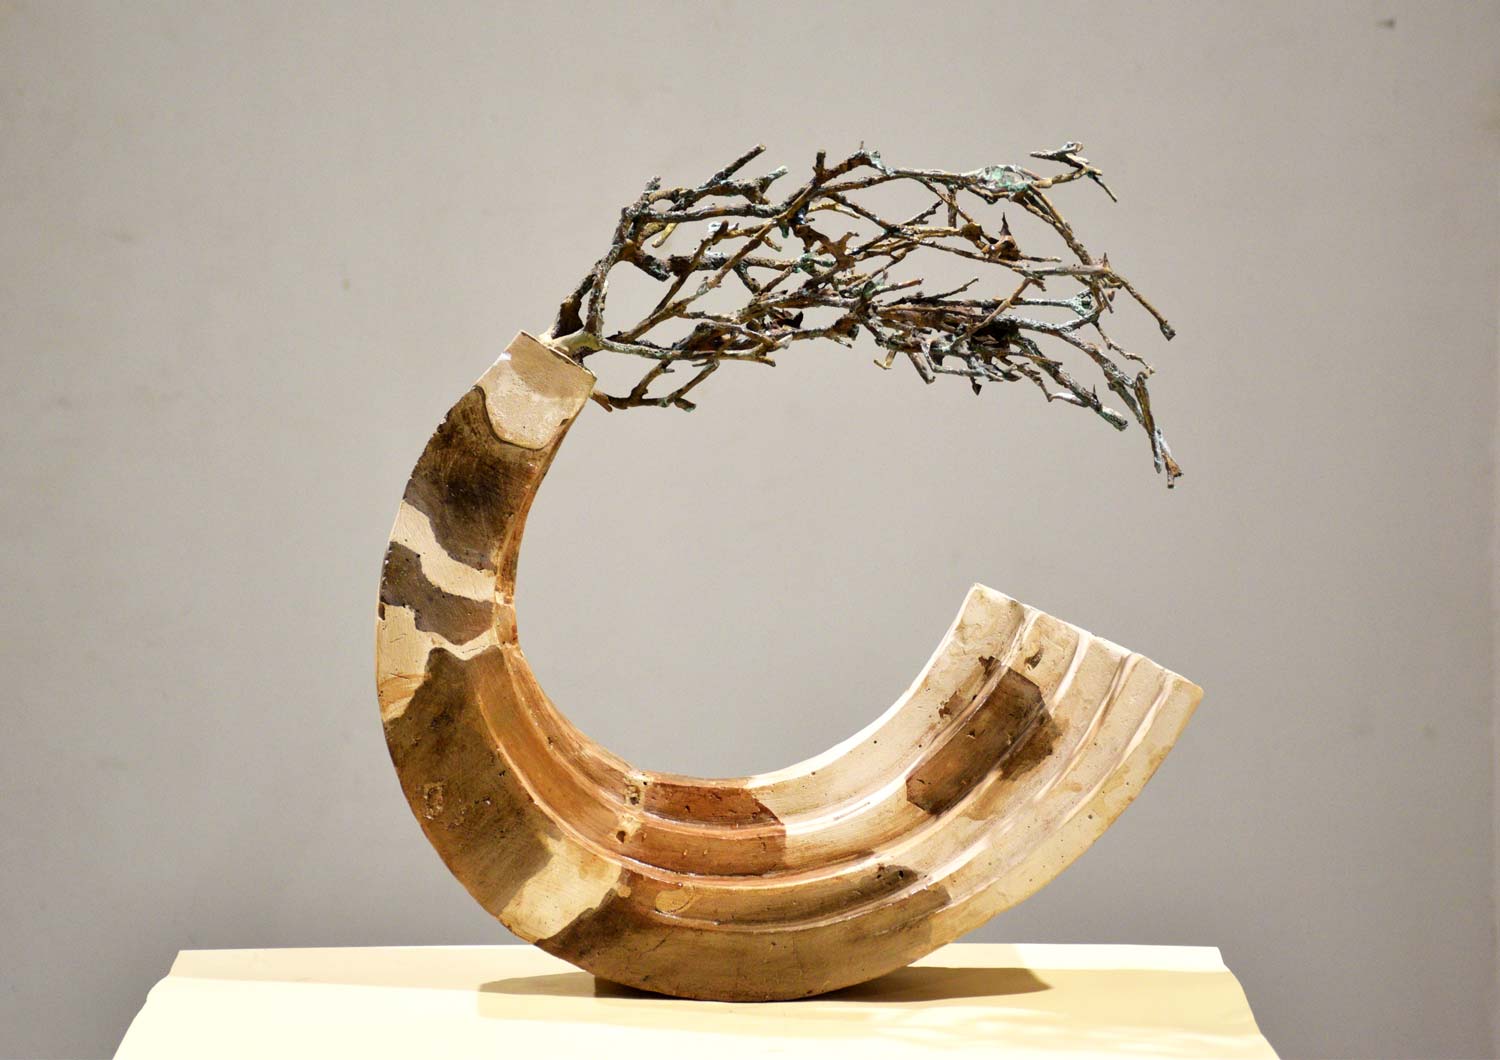 Contemporary Sculpture with Mixed Media"Life Destroy Another life" art by Vikas Kumar Yadav